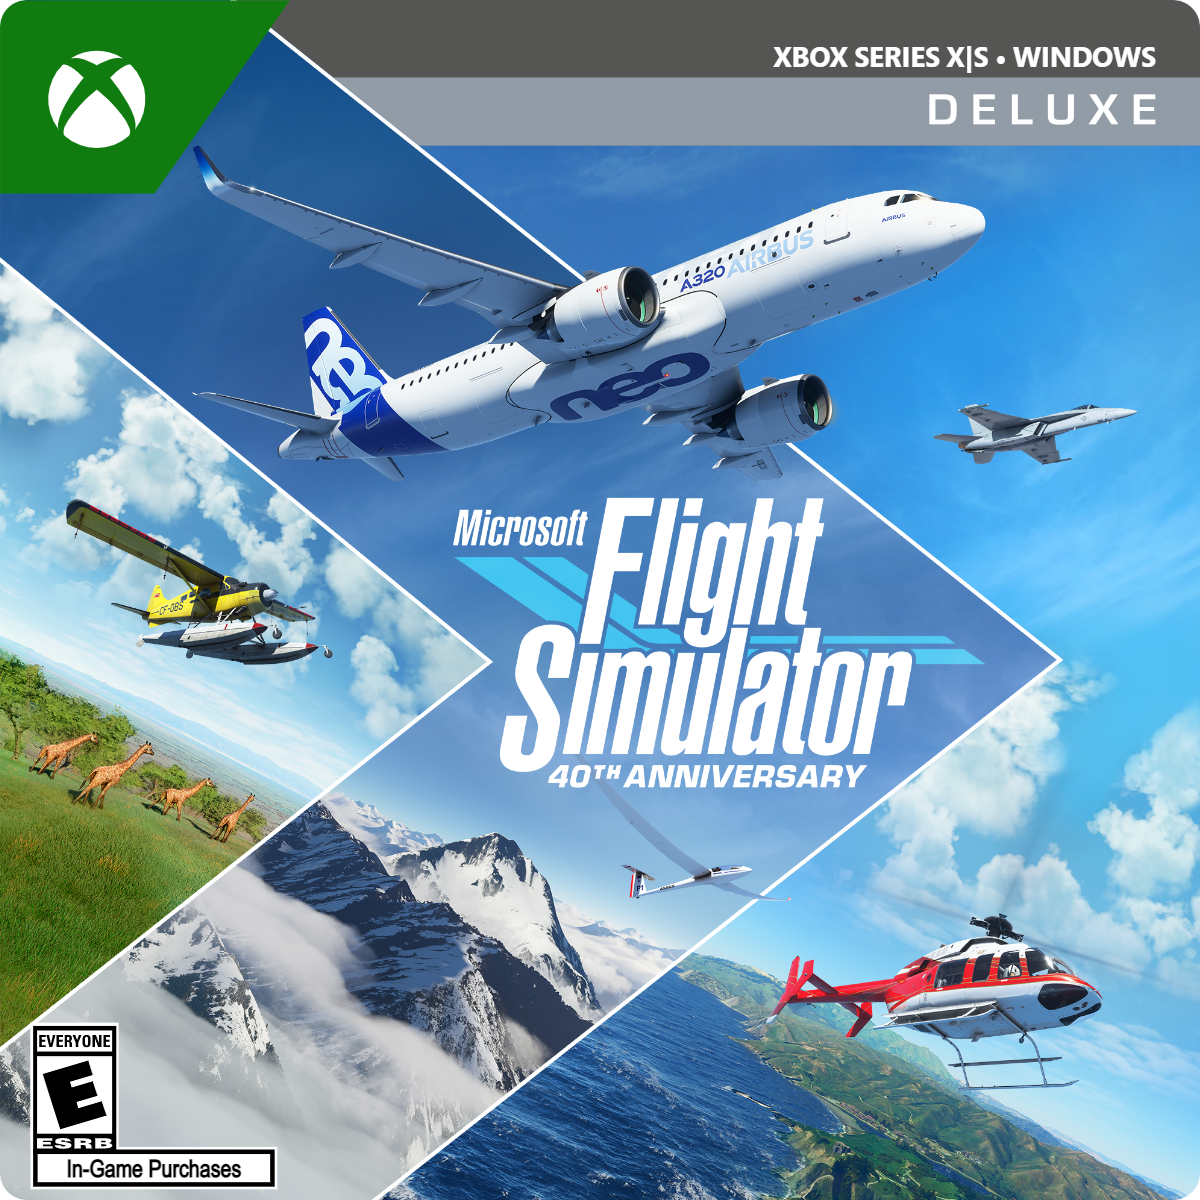 Flight Simulator 2020 Specs: What You'll Need To Make The game Fly